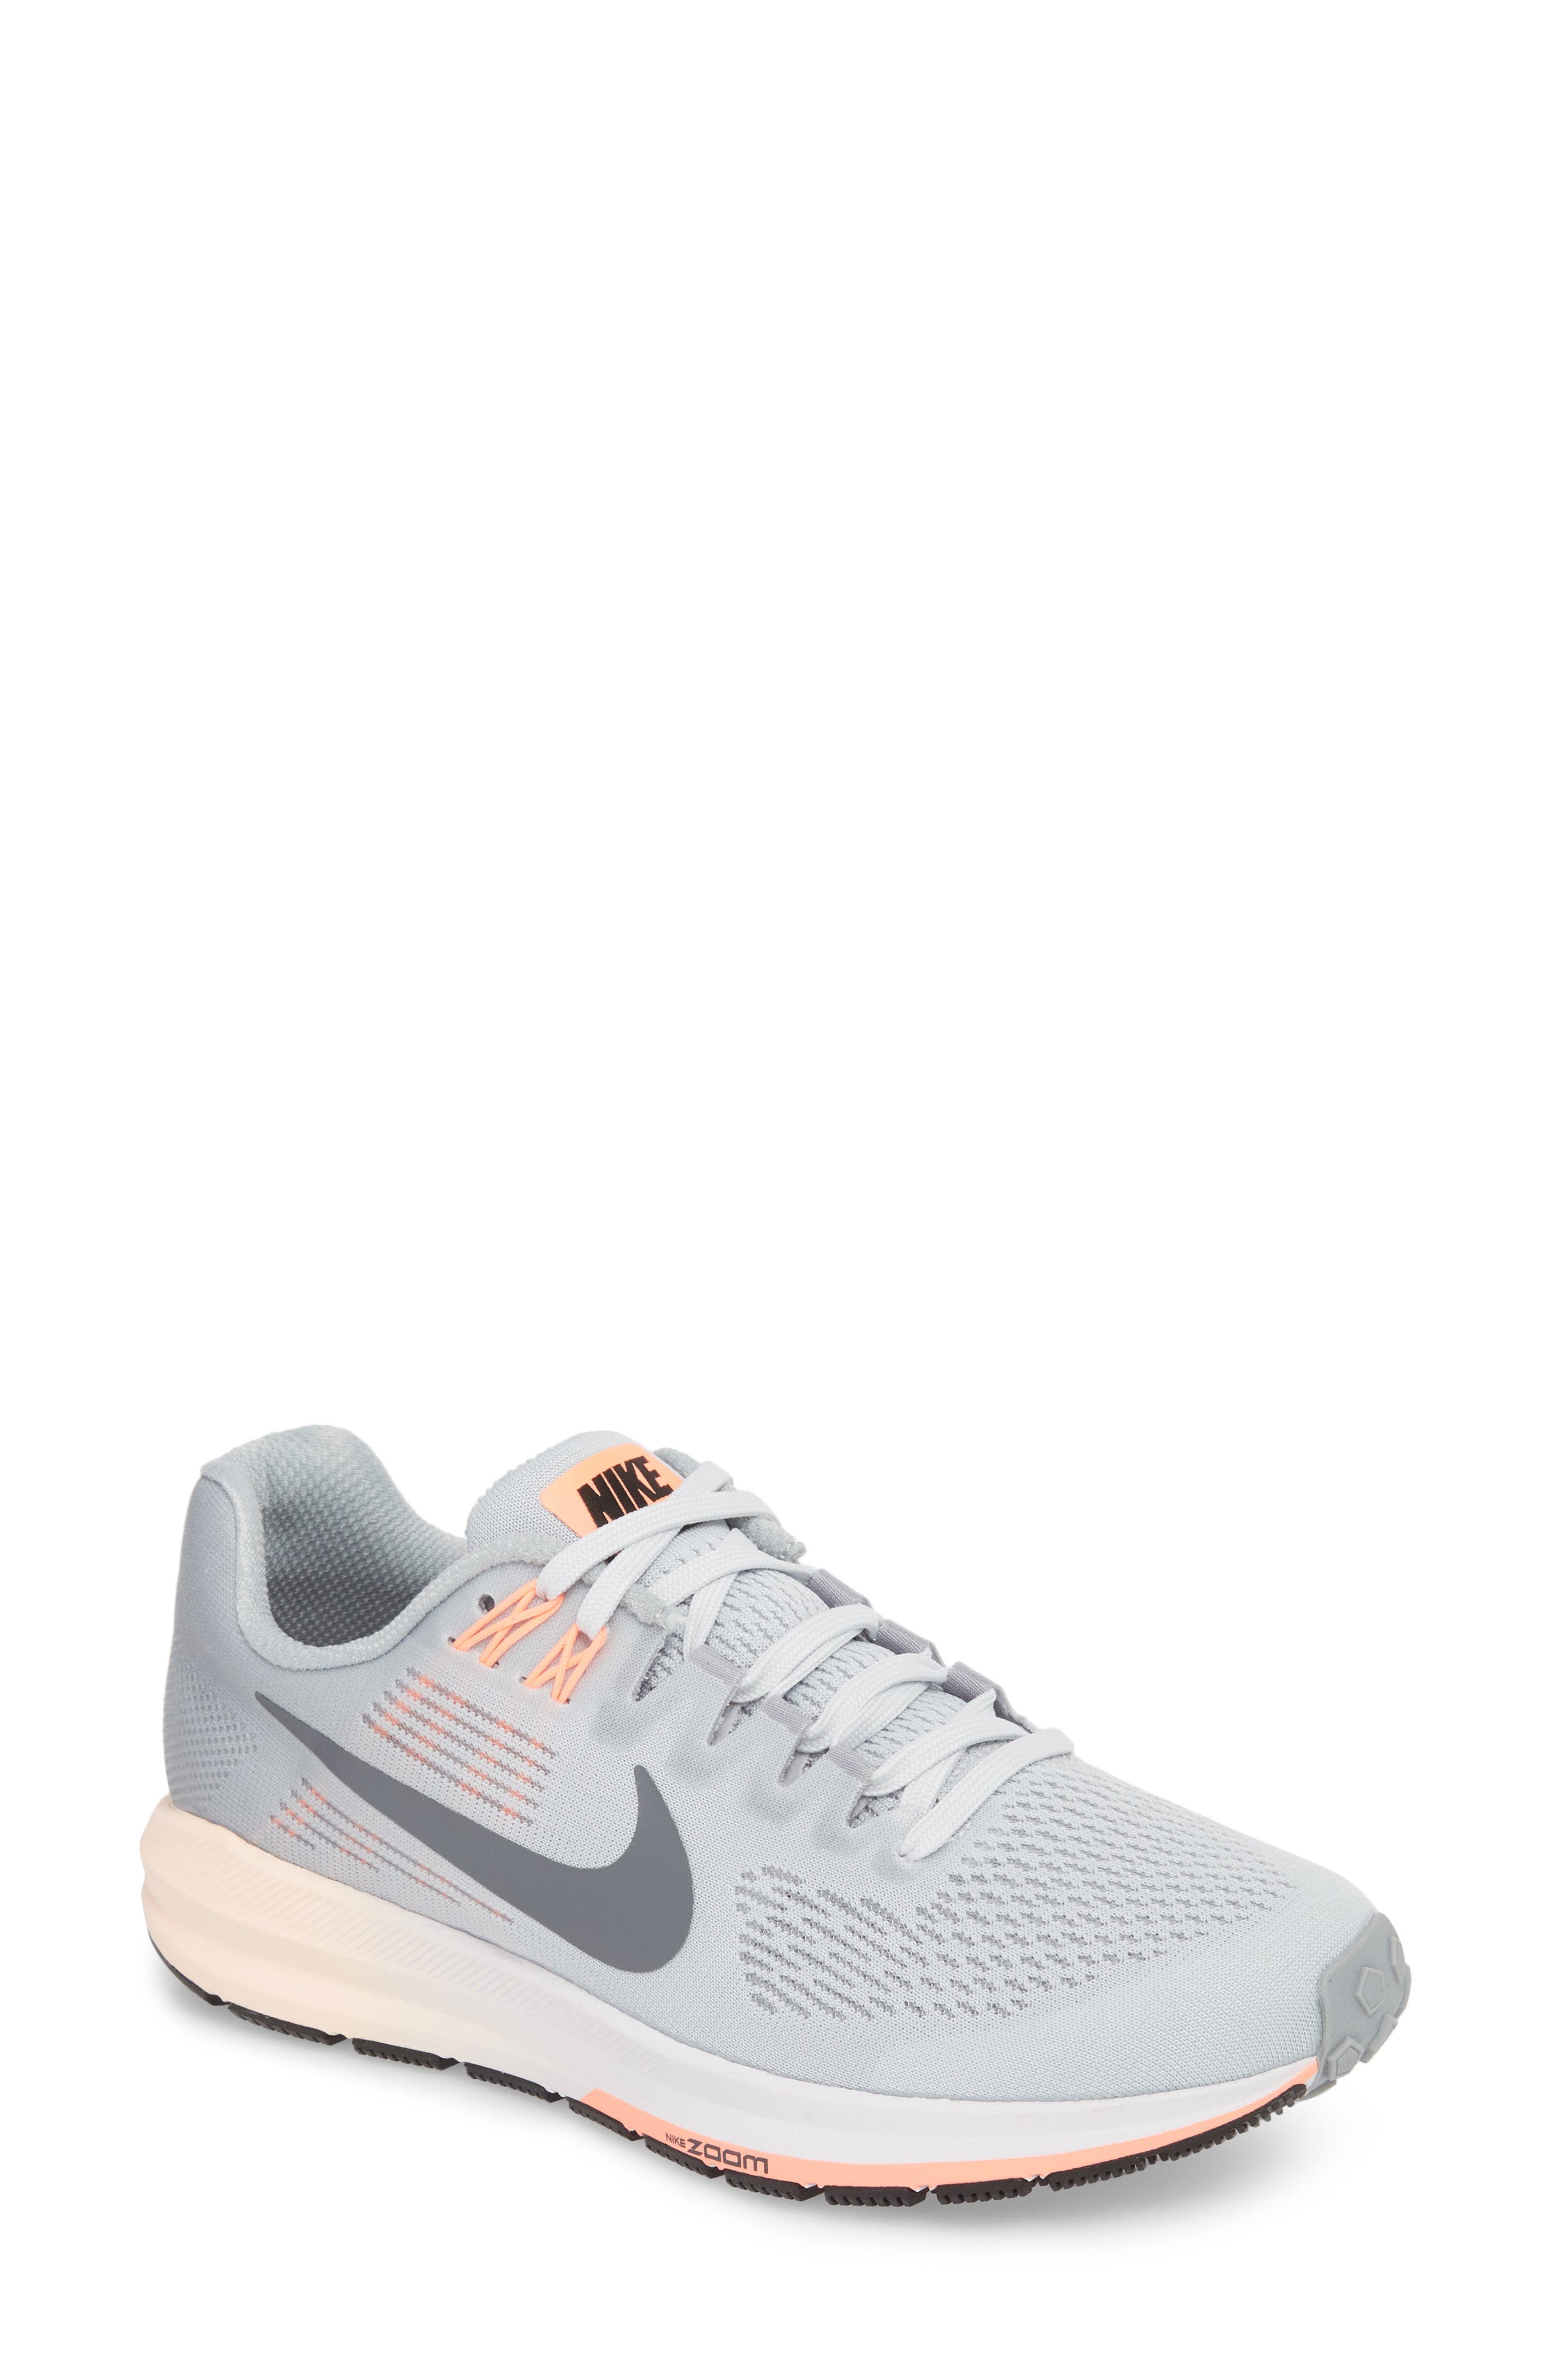 Nike Air Zoom Structure 21 Running Shoe 